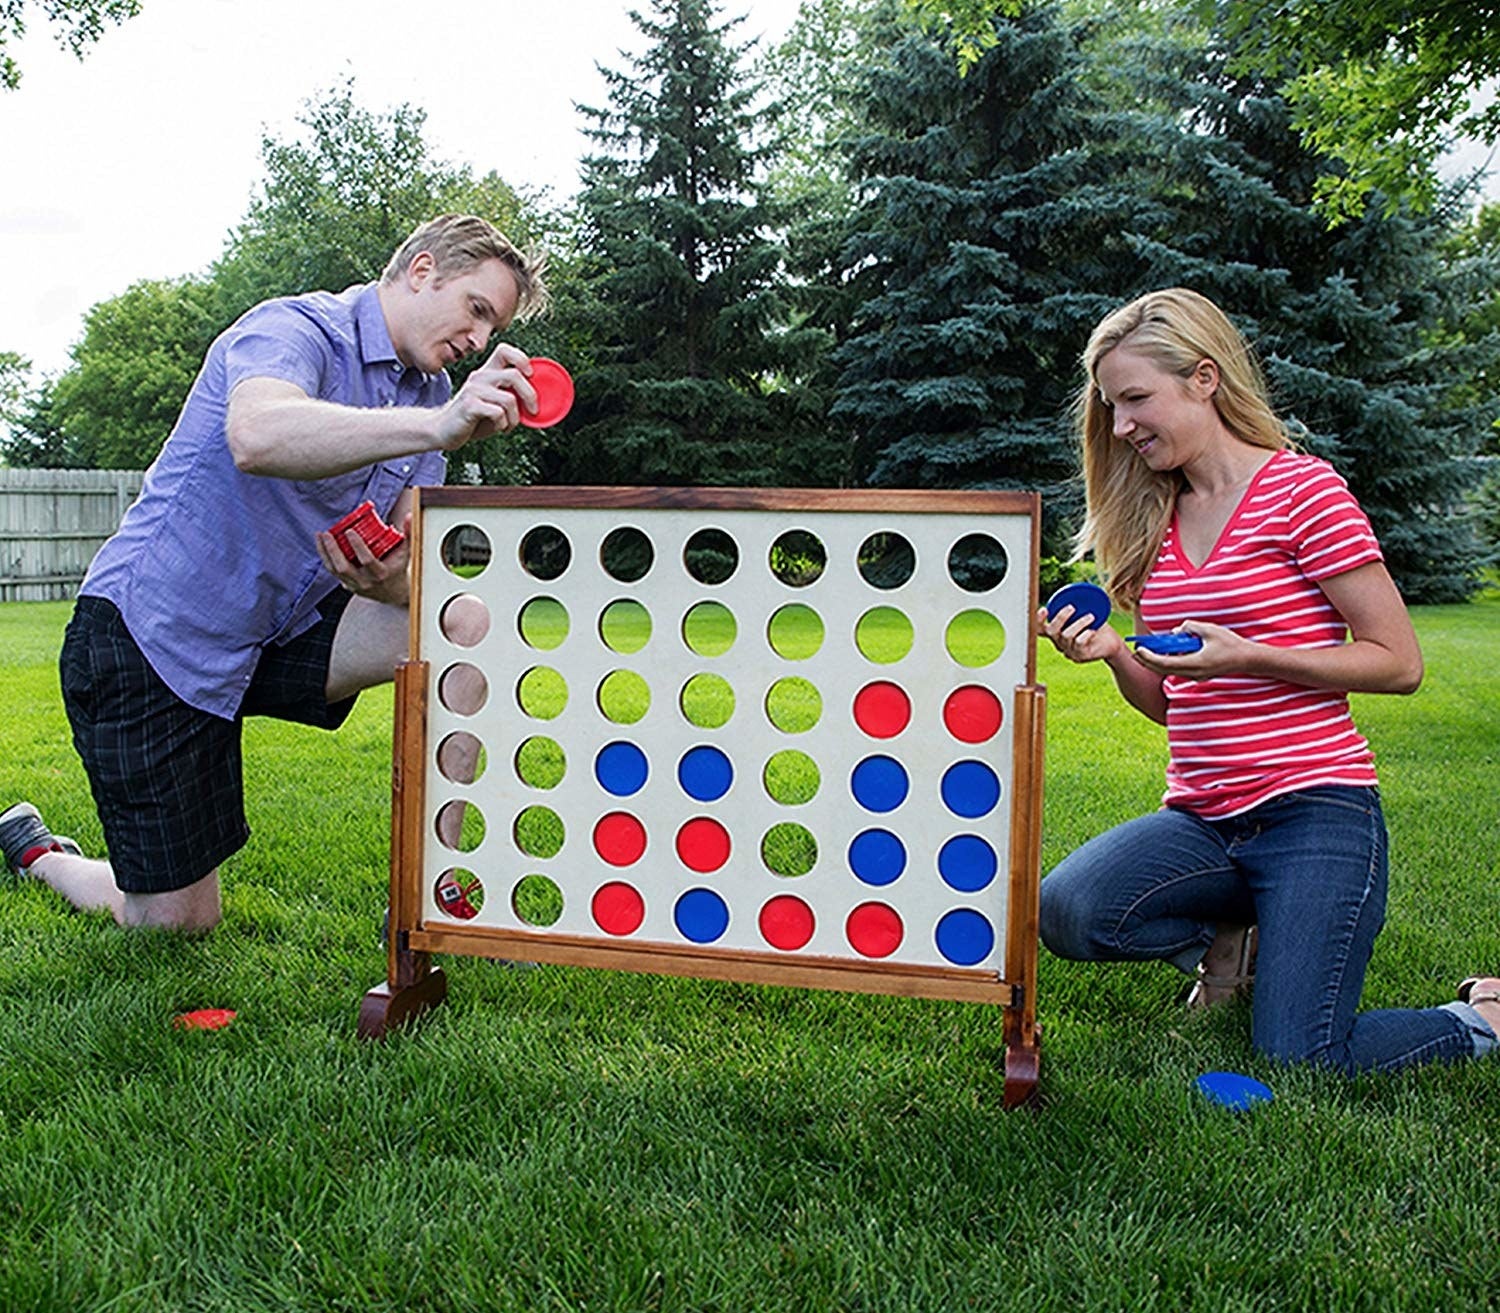 a couple is kneeling in the grass playing with an oversized version of the game connect four. the board includes many open circle slots where blue and red tiles are place inside